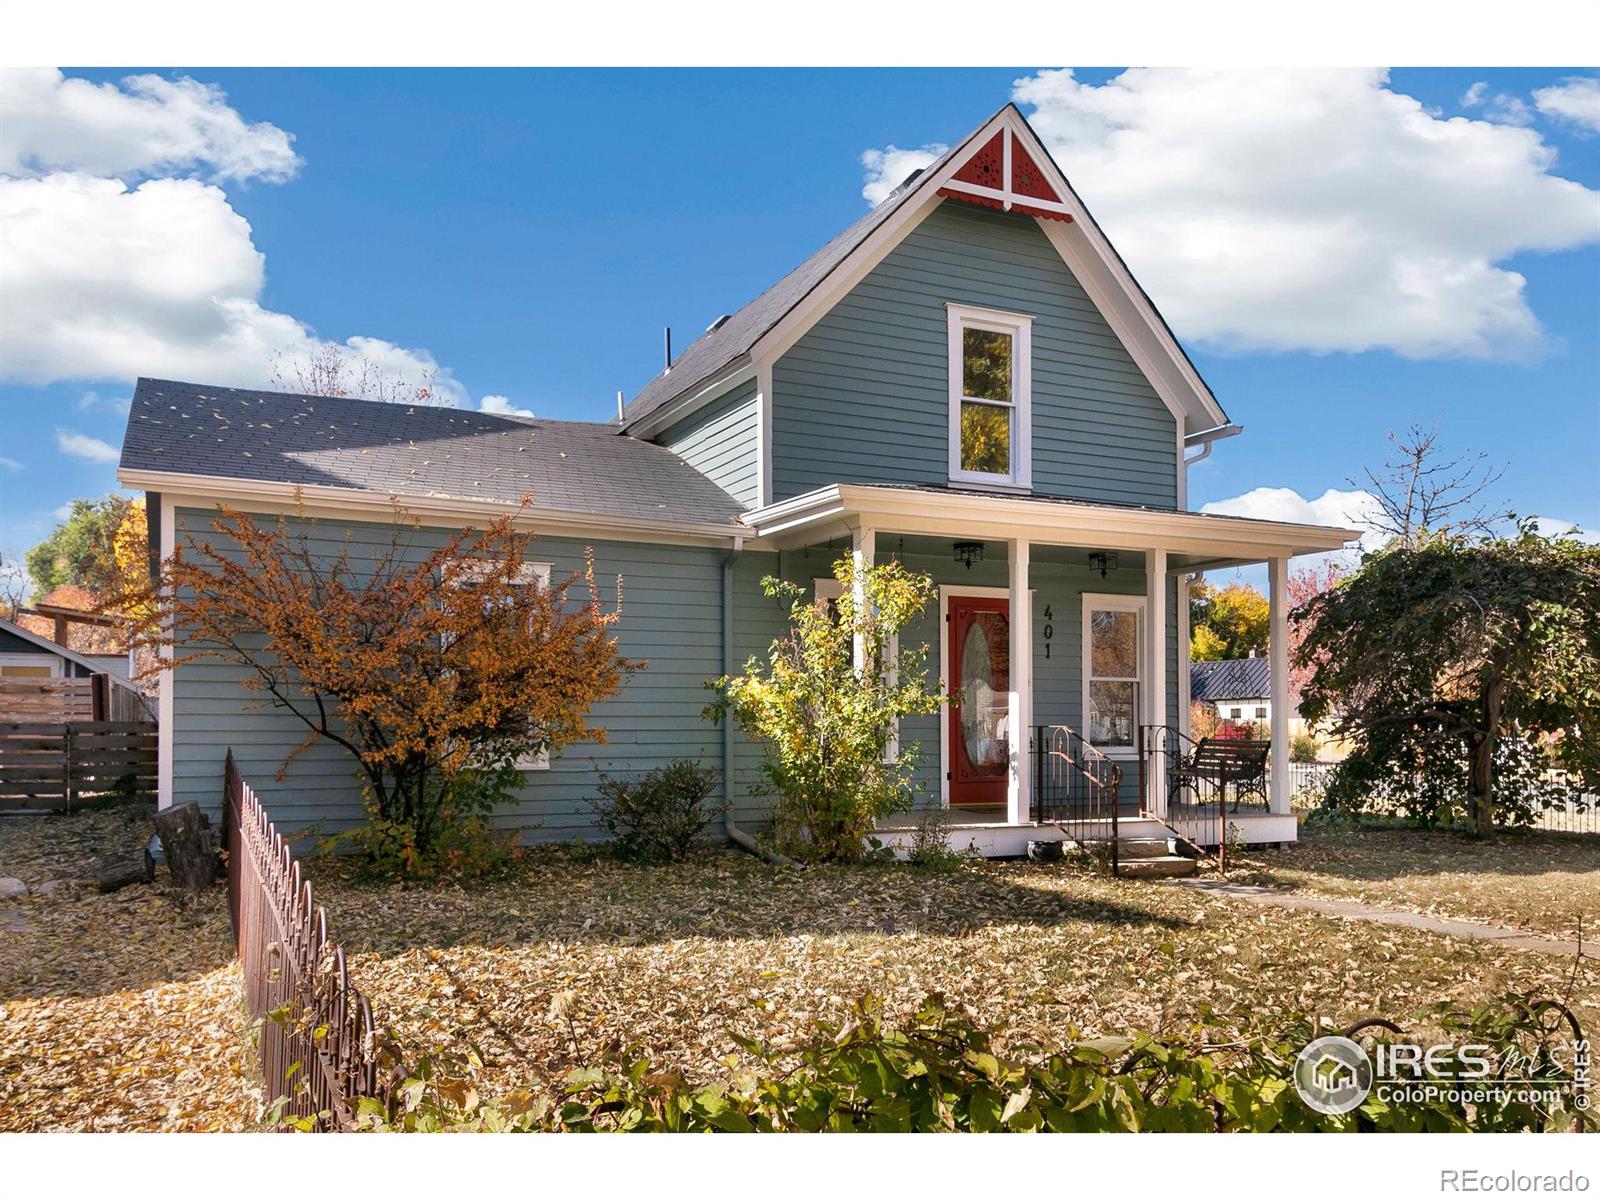 401  Smith Street, fort collins MLS: 4567891002164 Beds: 3 Baths: 2 Price: $745,000